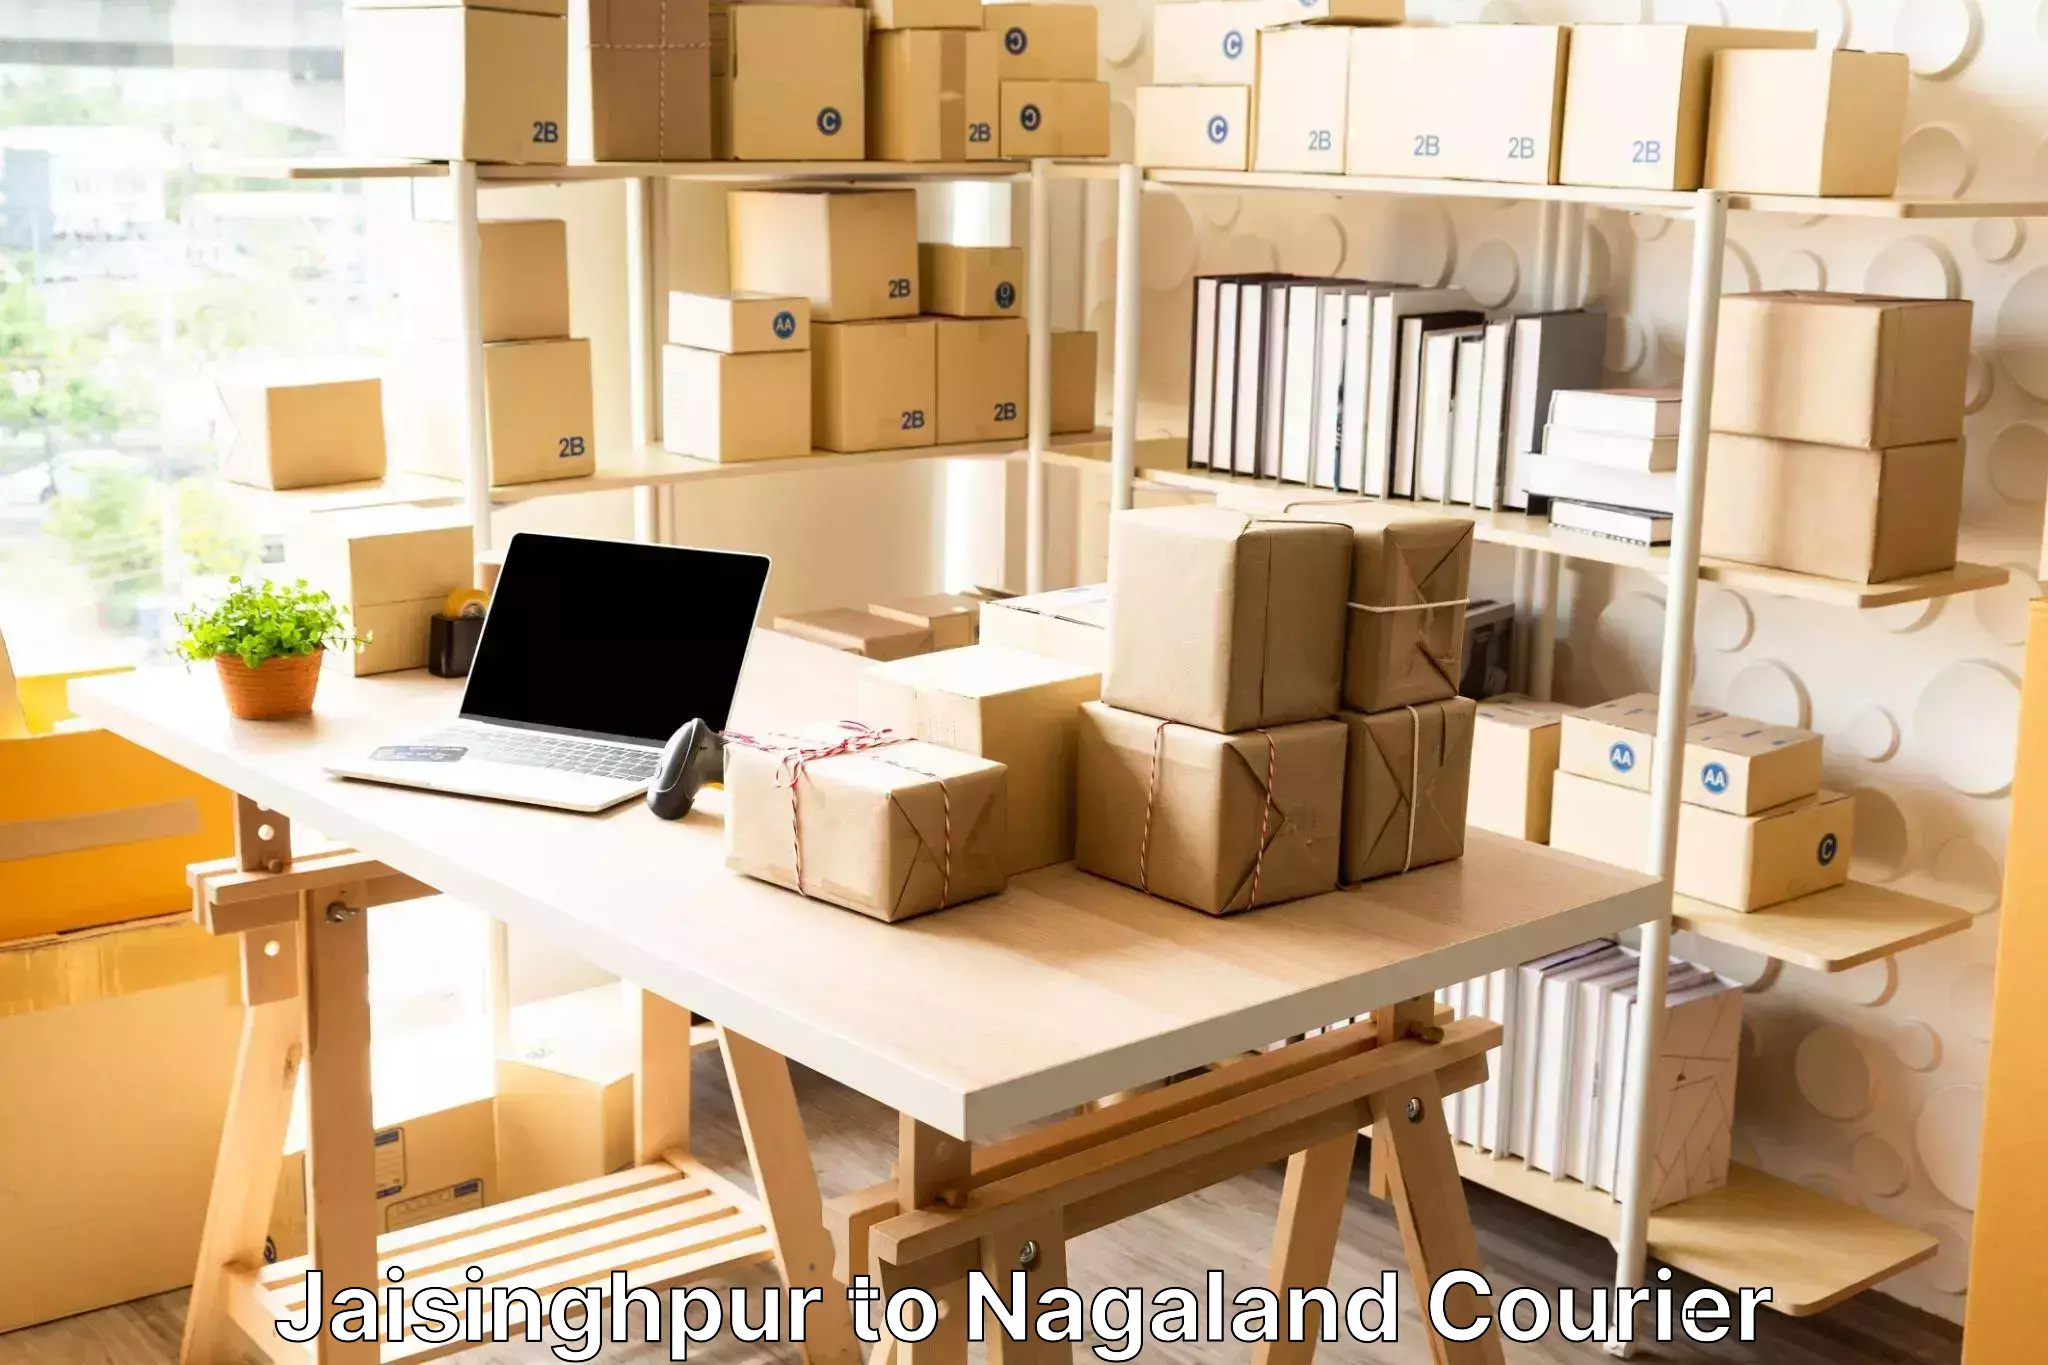 Baggage delivery support Jaisinghpur to Nagaland